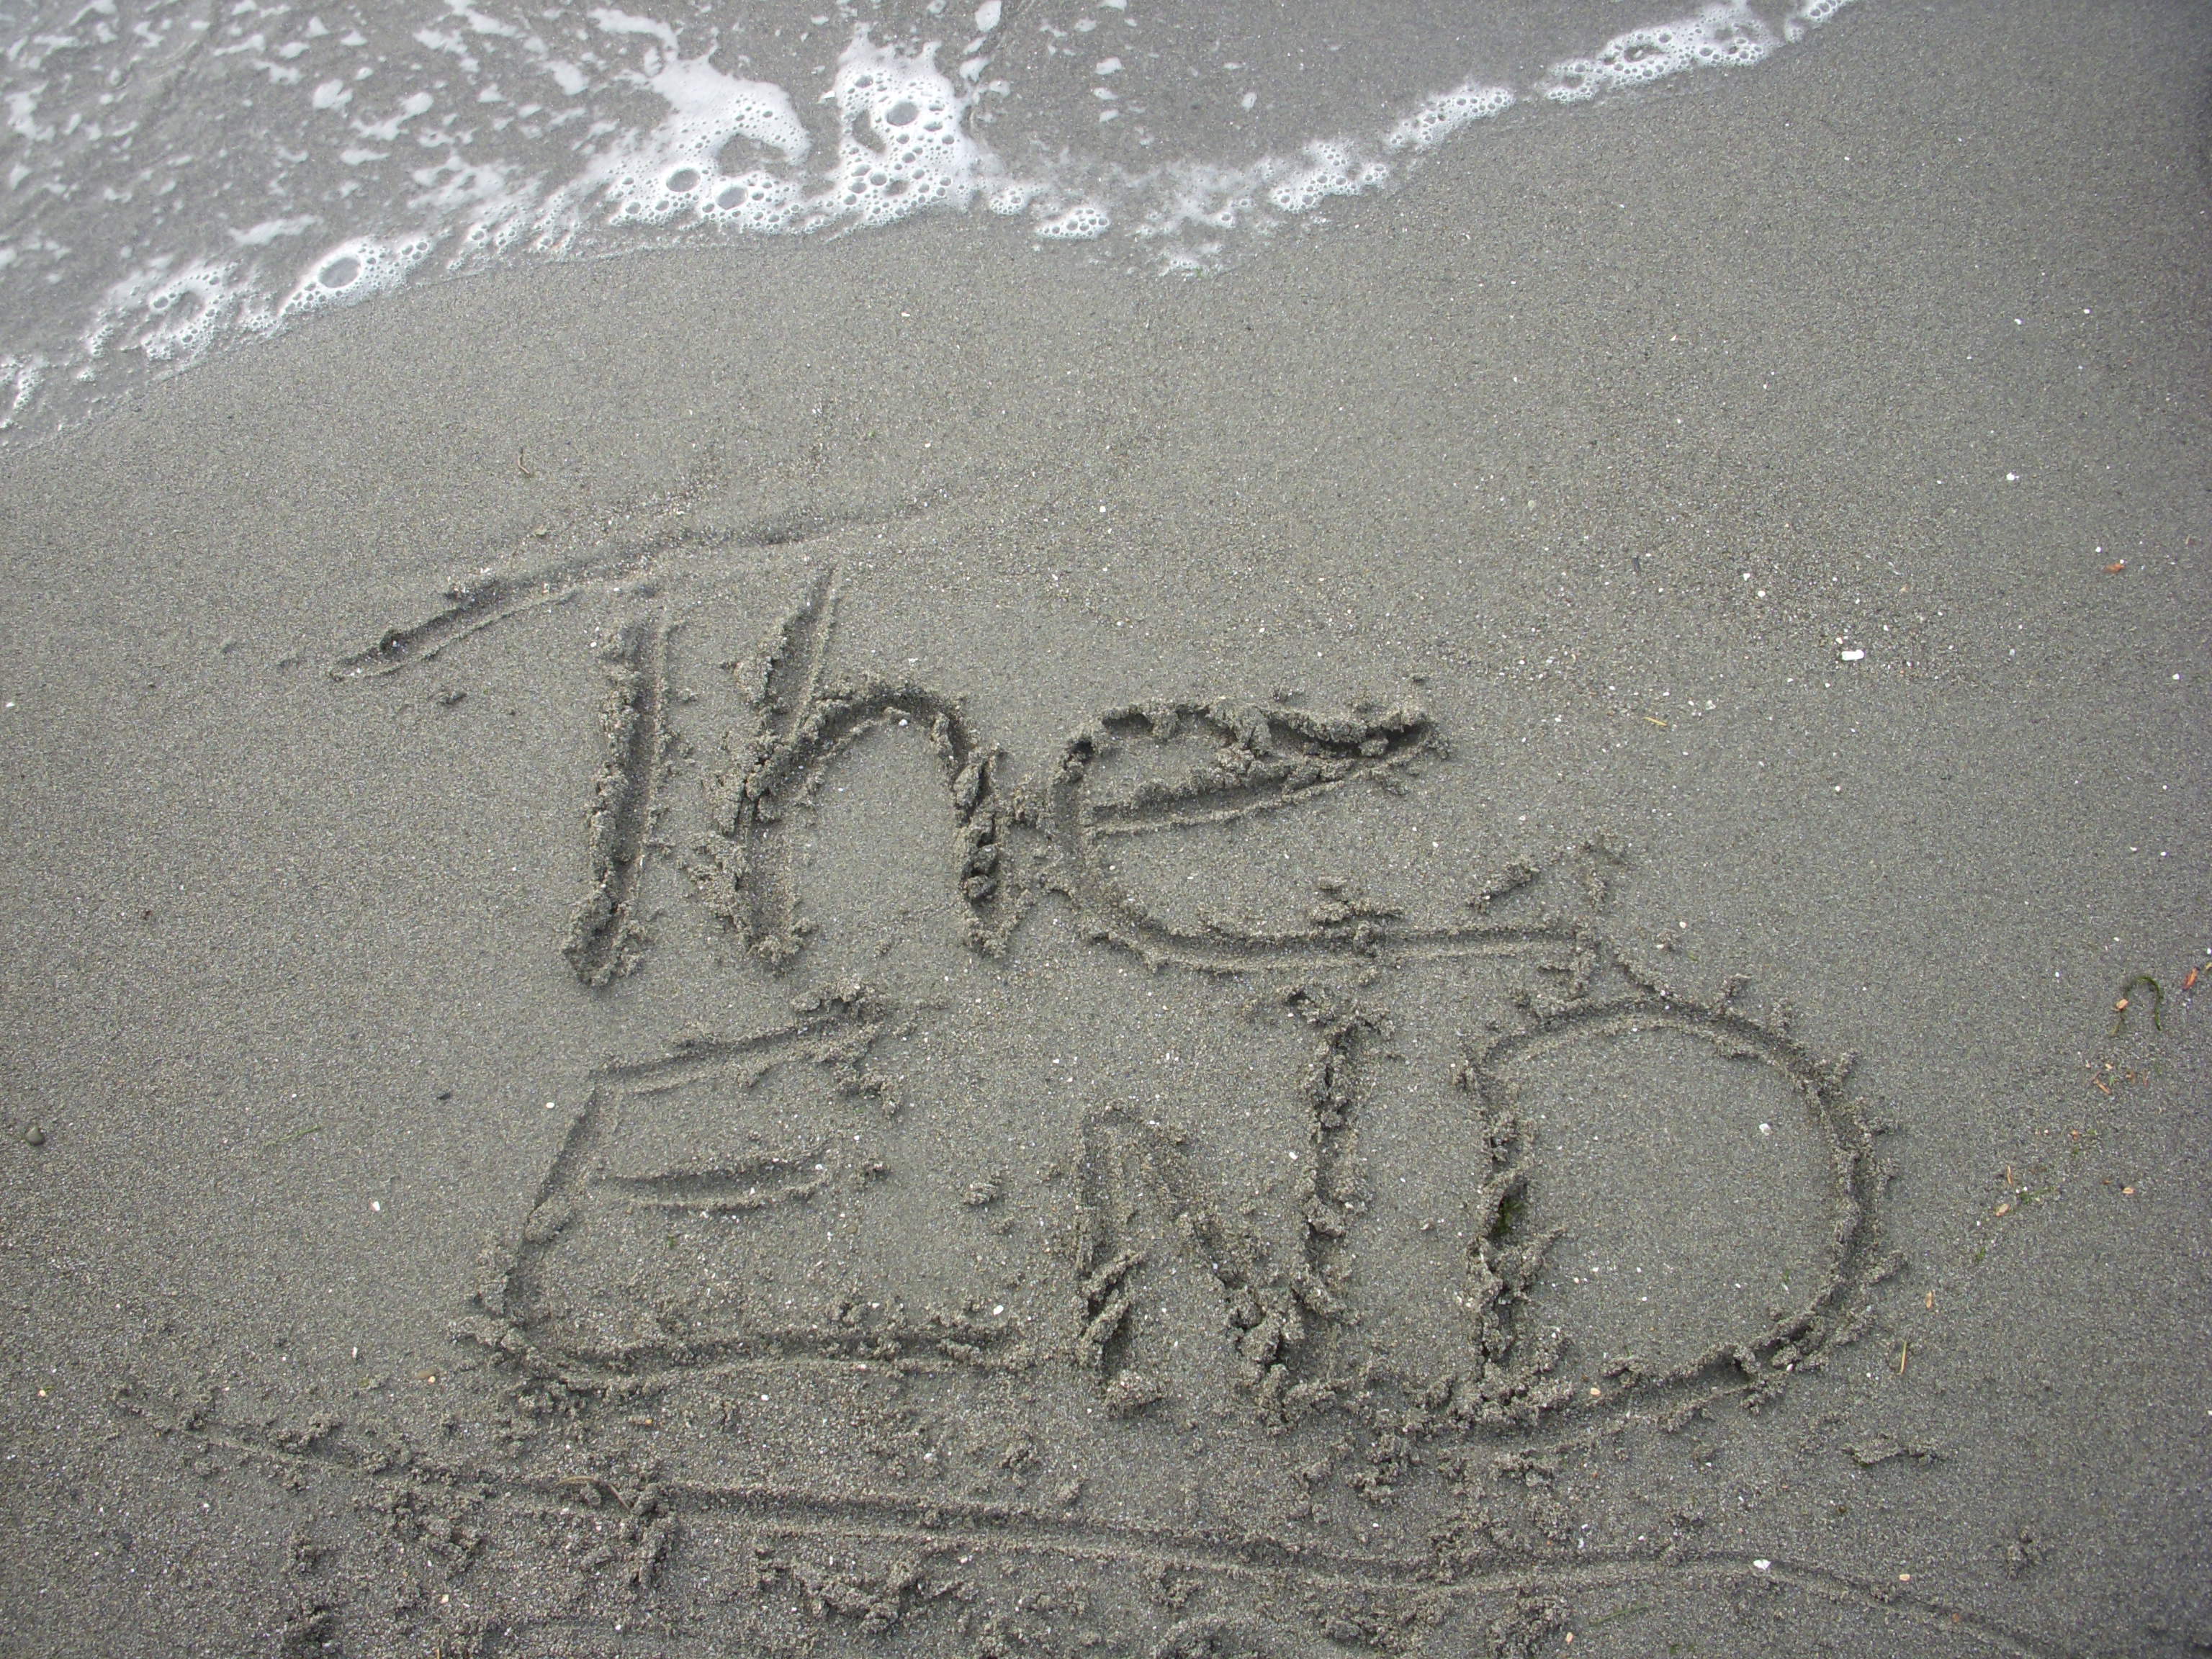 Results image of The End written in sand